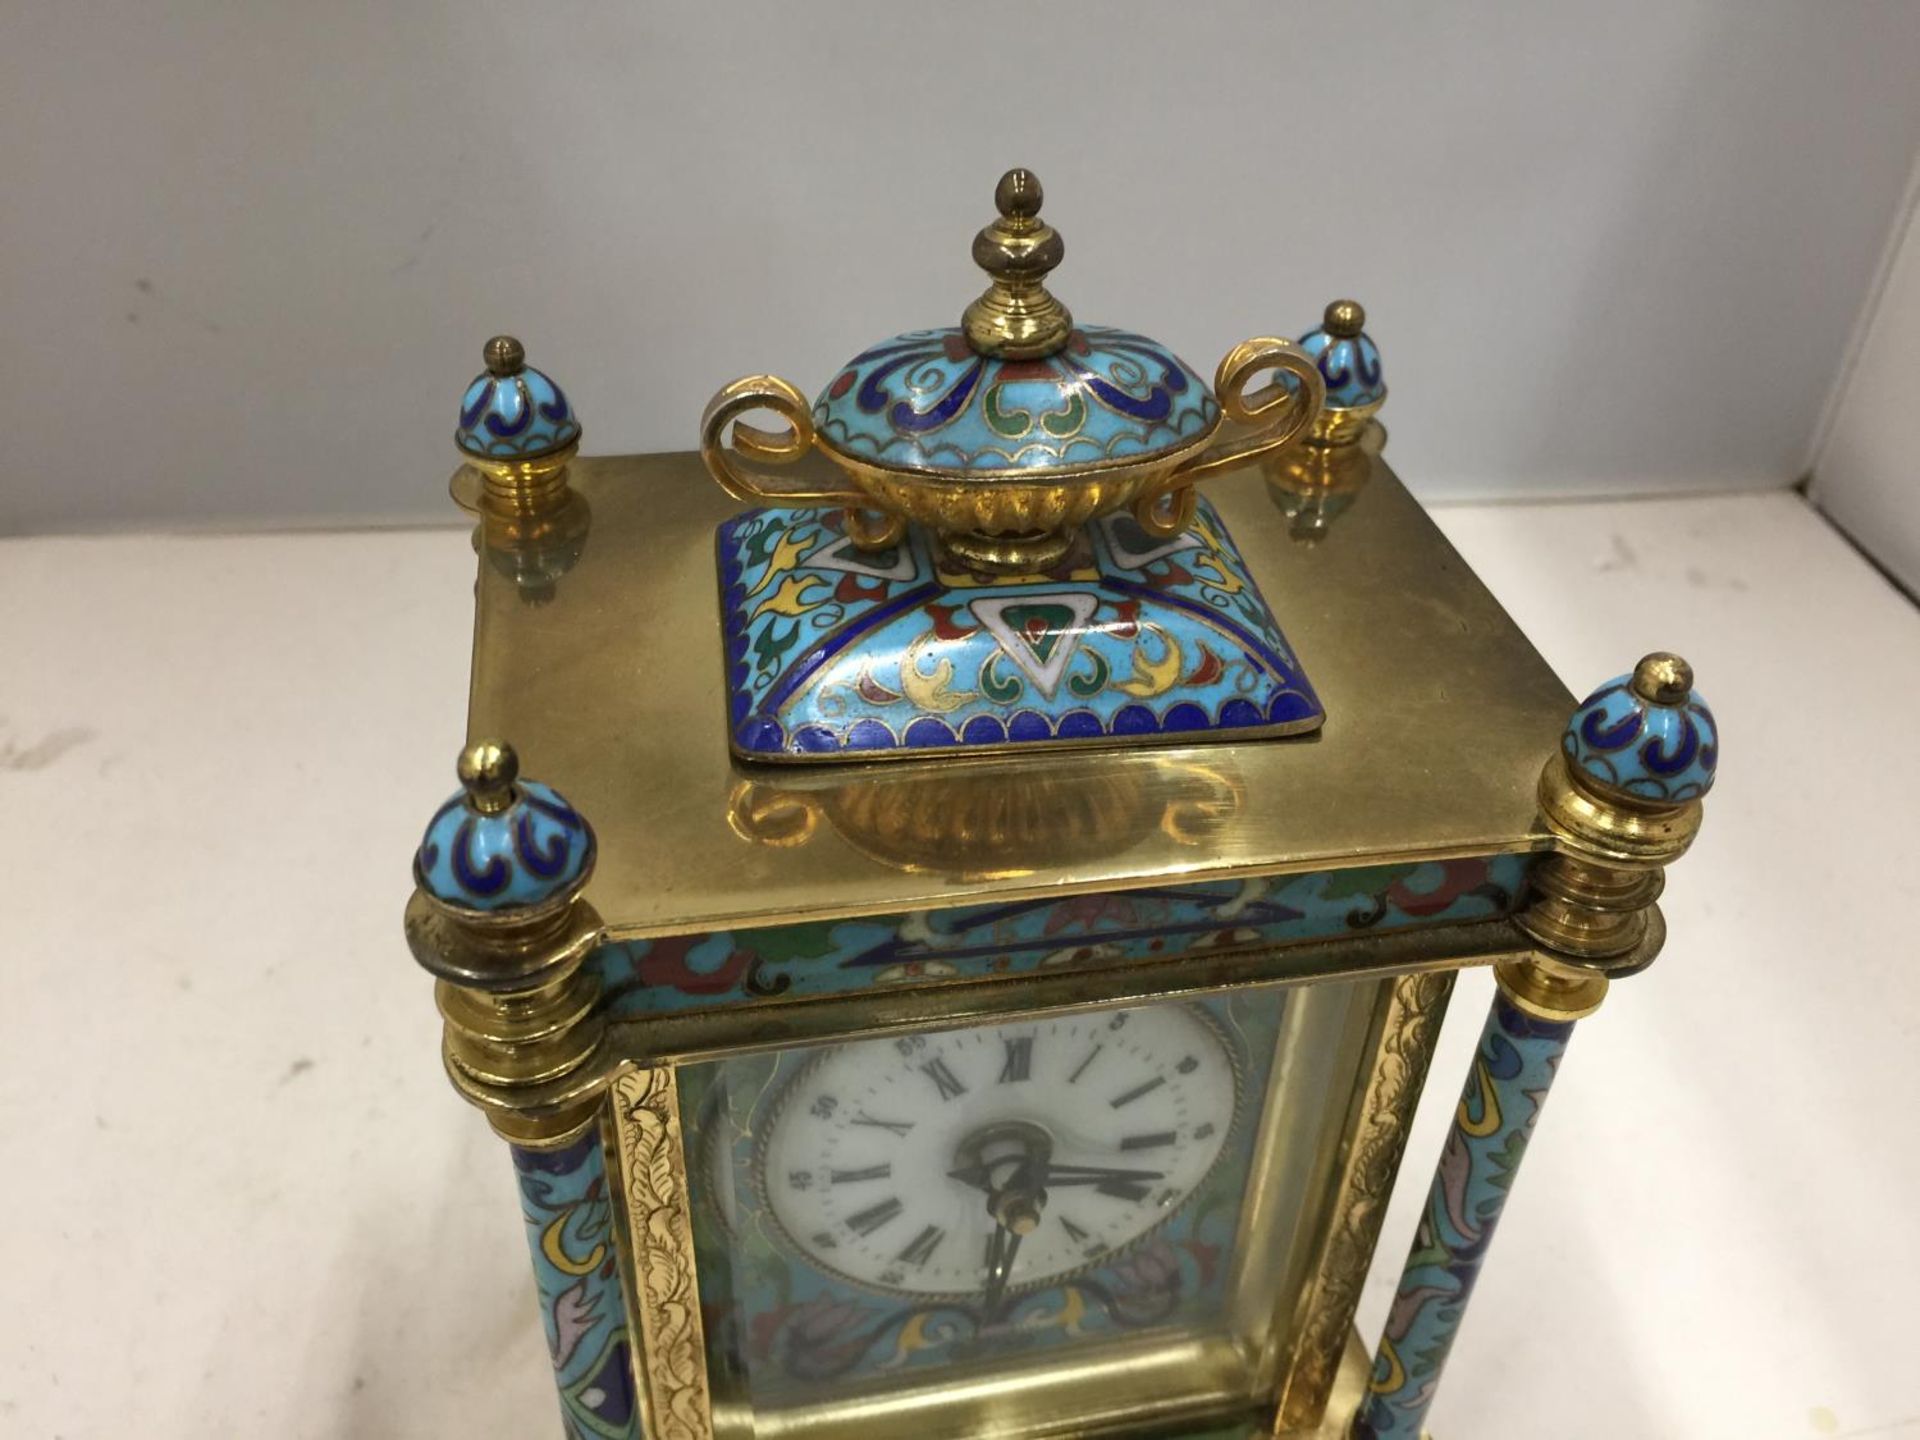 AN ORNATE CLOISONNE CARRIAGE CLOCK 22CM TALL - Image 2 of 7